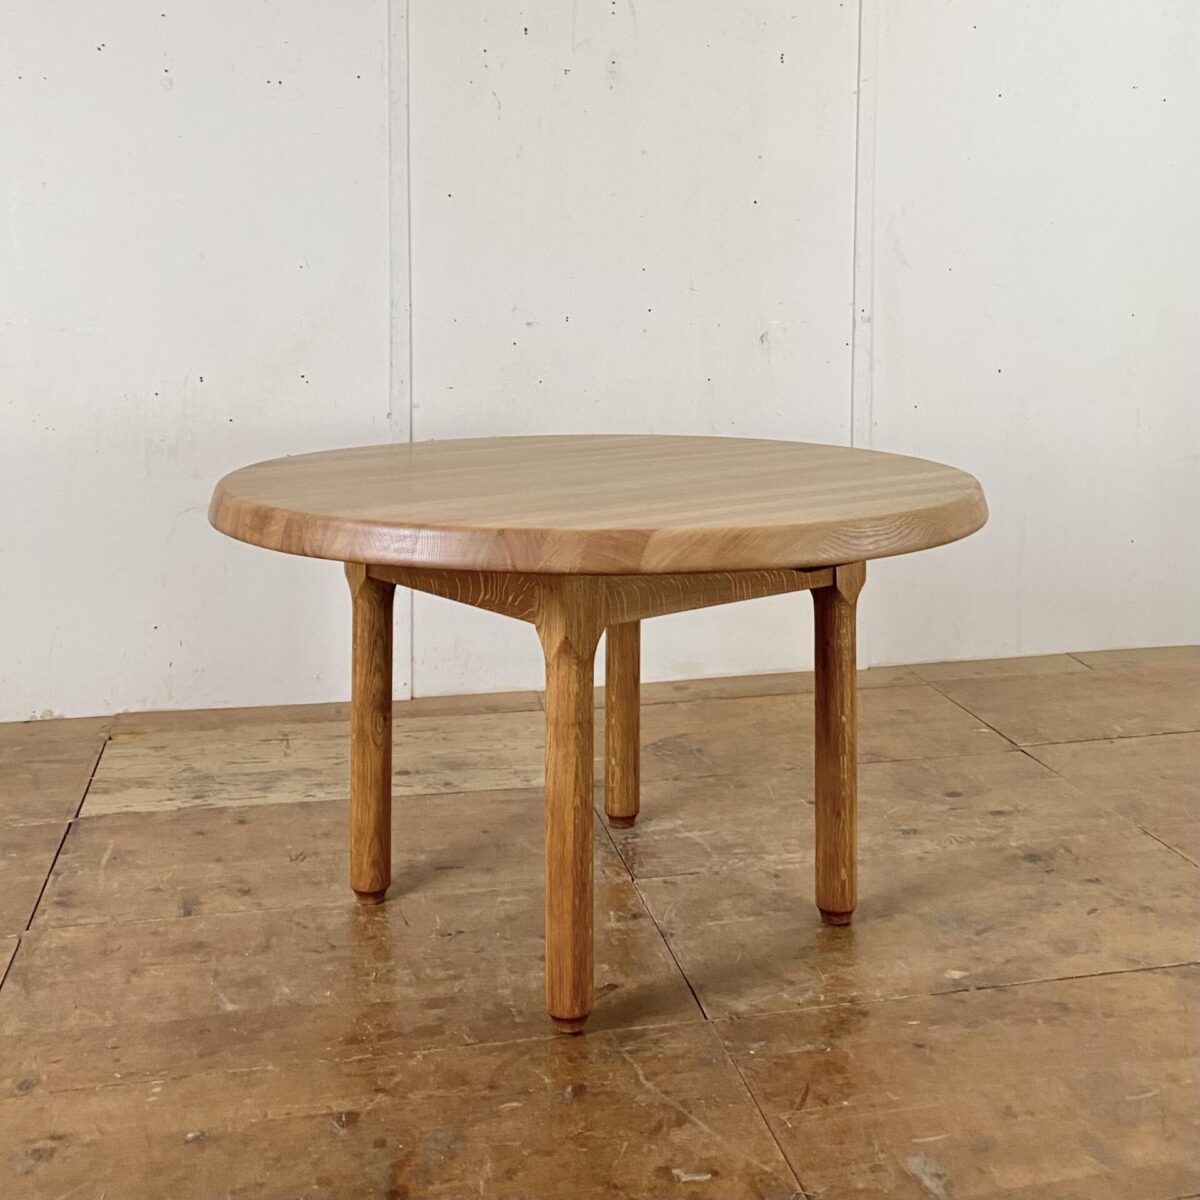 Deuxieme.shop midcentury french oak table Charlotte Perriand